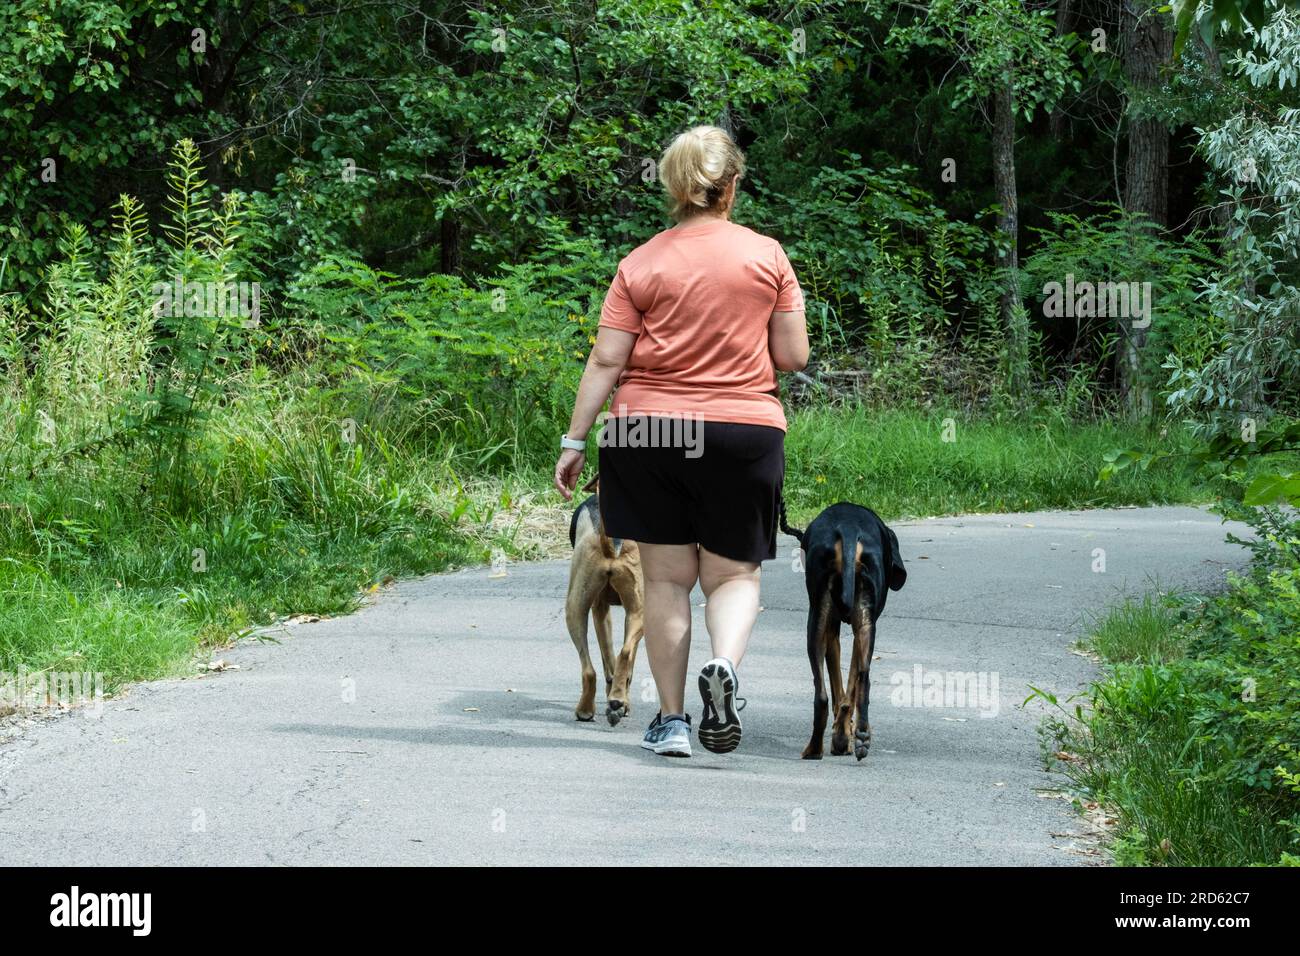 An adult Caucasian woman in summer attire walks two dogs on a nature path in Wichita, Kansas, USA. Stock Photo